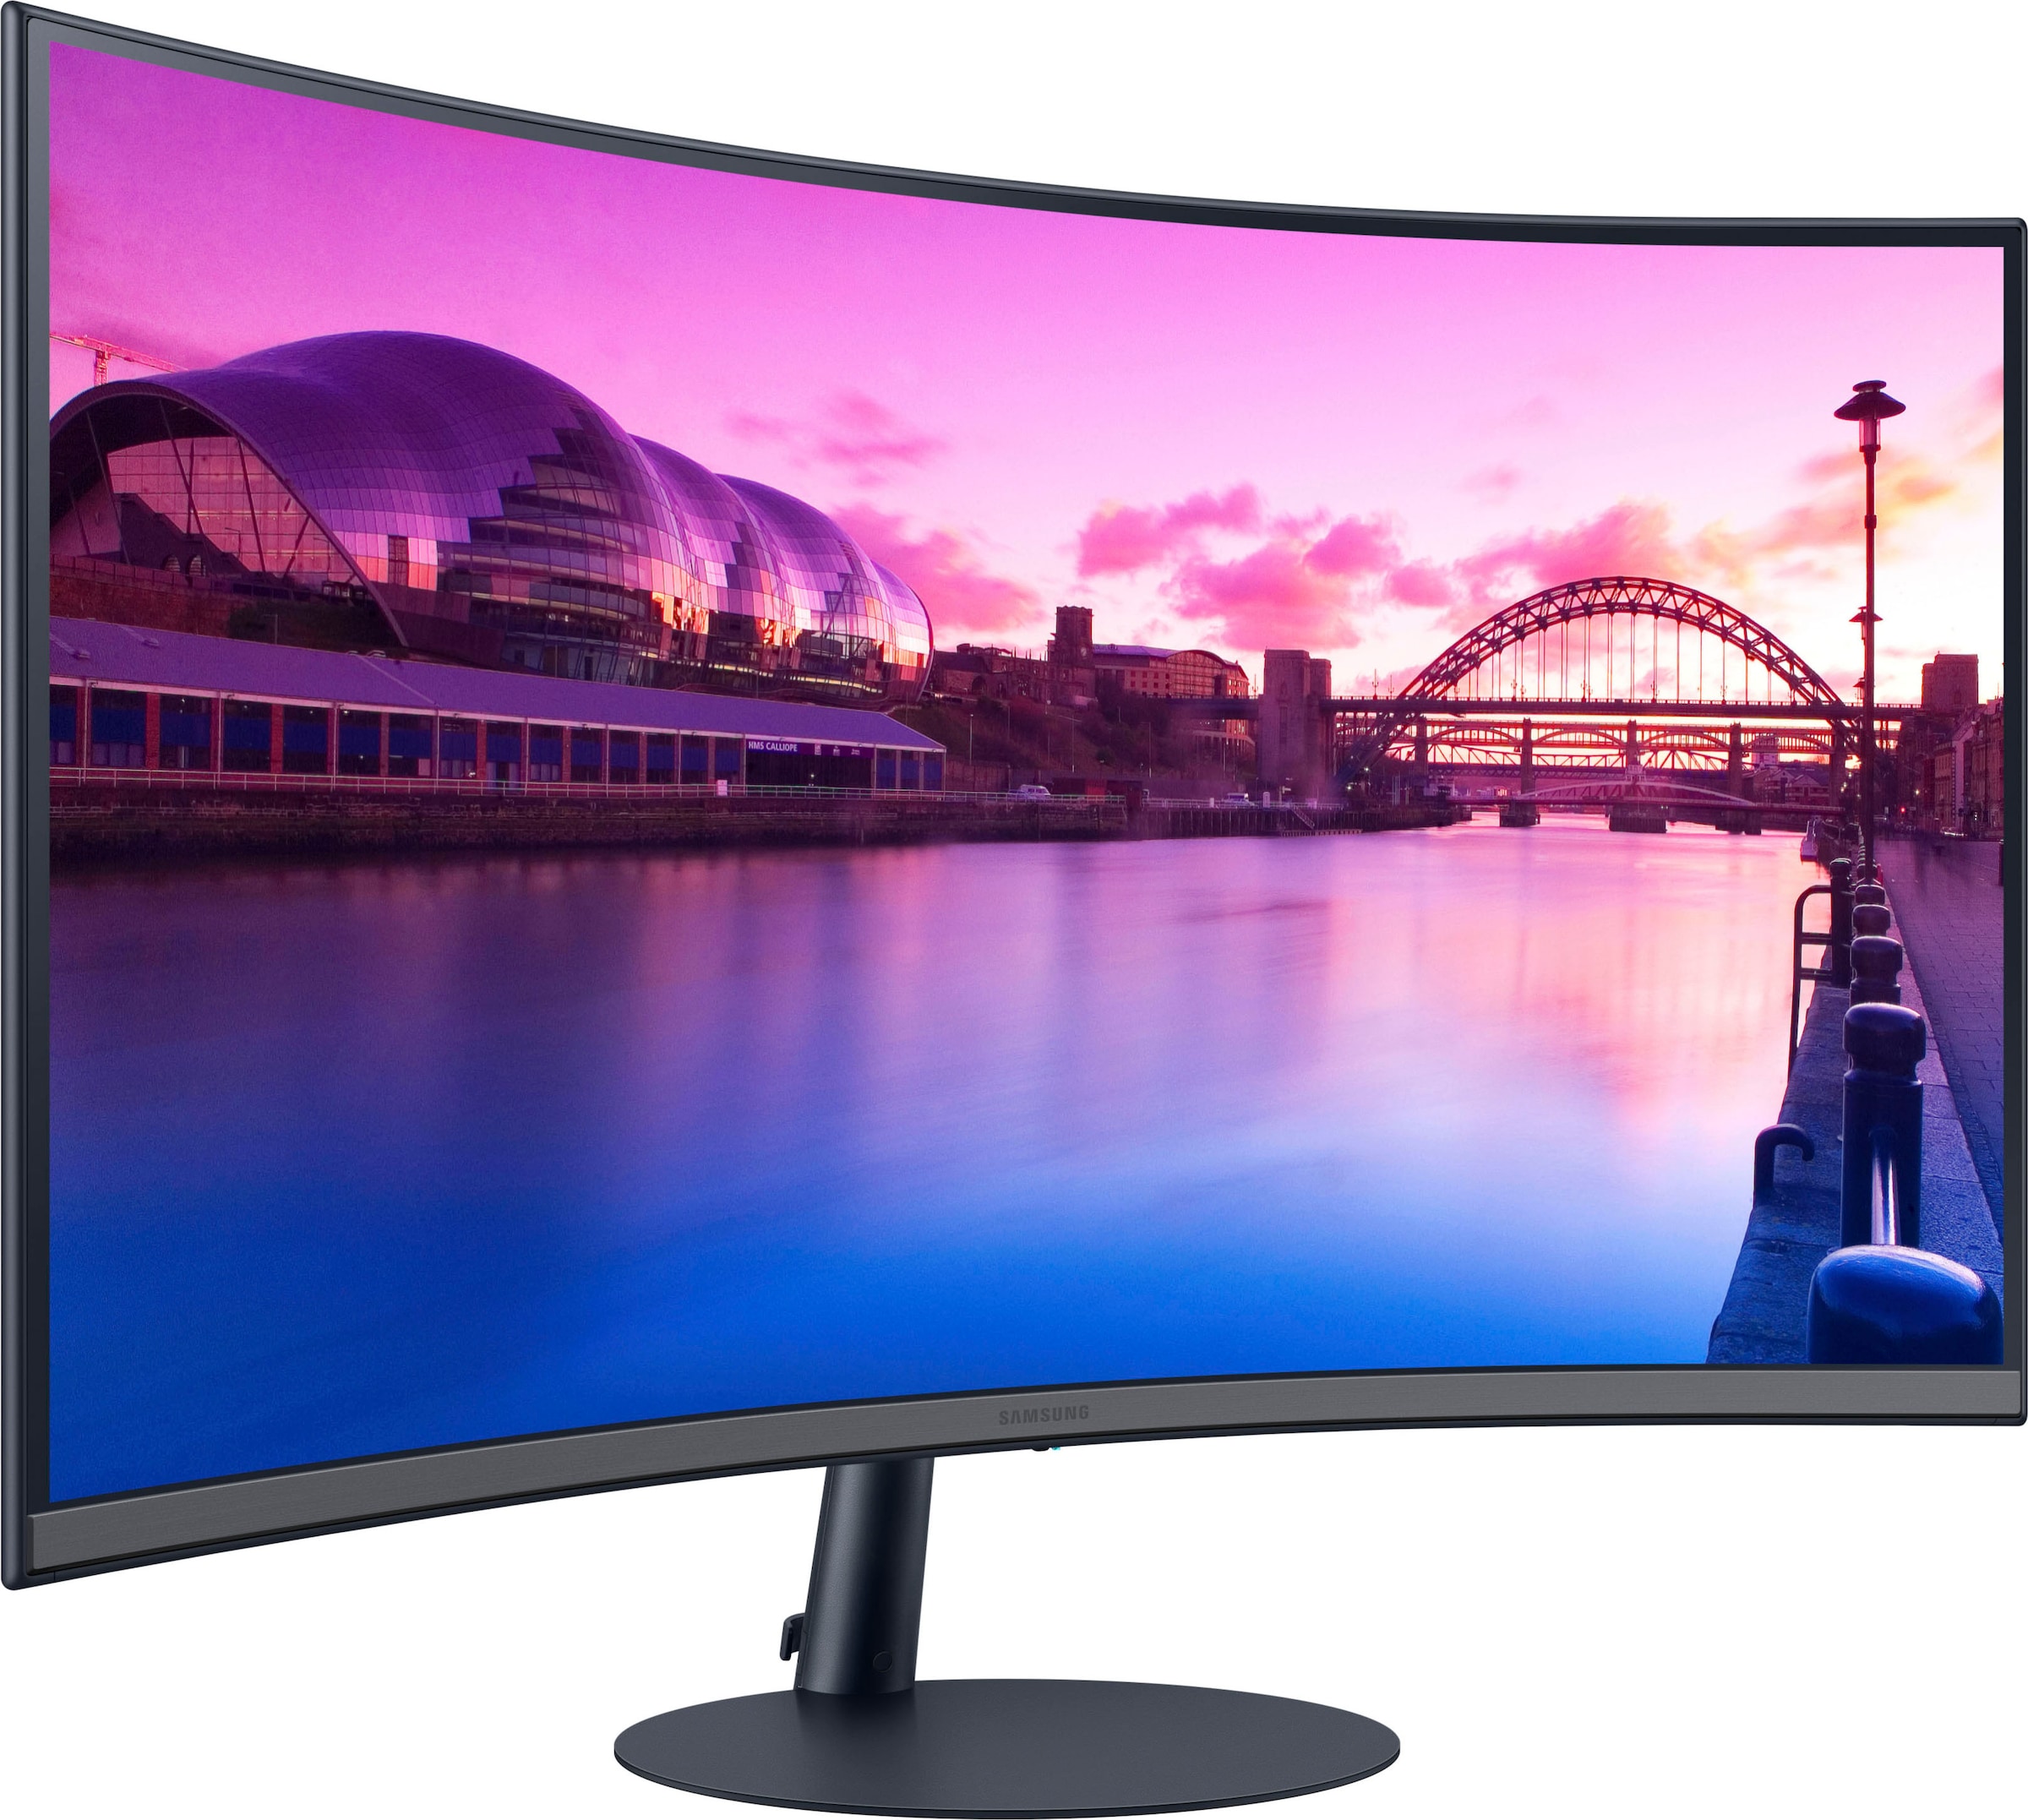 1080 75 Curved-LED-Monitor 4 »S27C390EAU«, Samsung Full HD, 68,6 Reaktionszeit, bei 1920 ms Zoll, px, online x OTTO cm/27 Hz